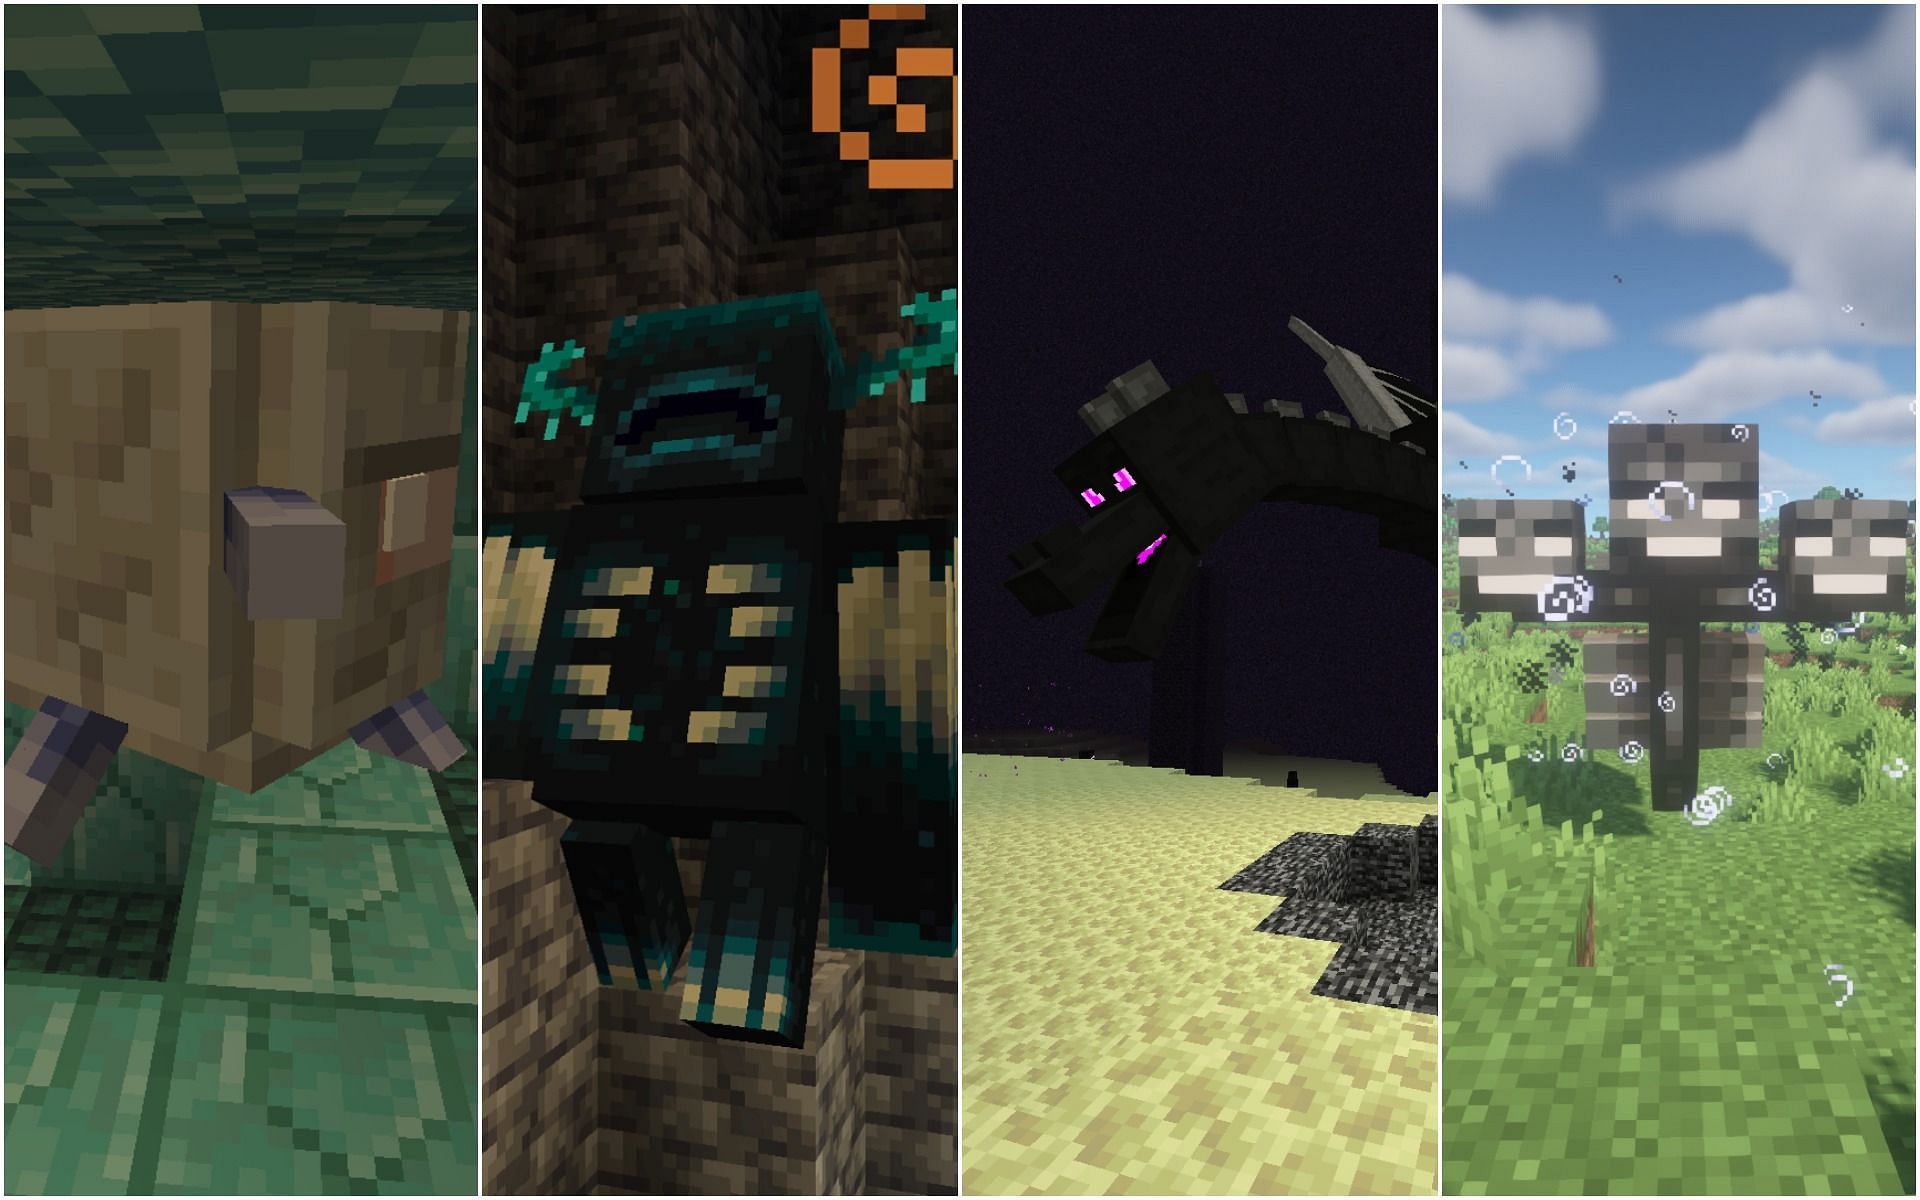 minecraft armored mob bosses